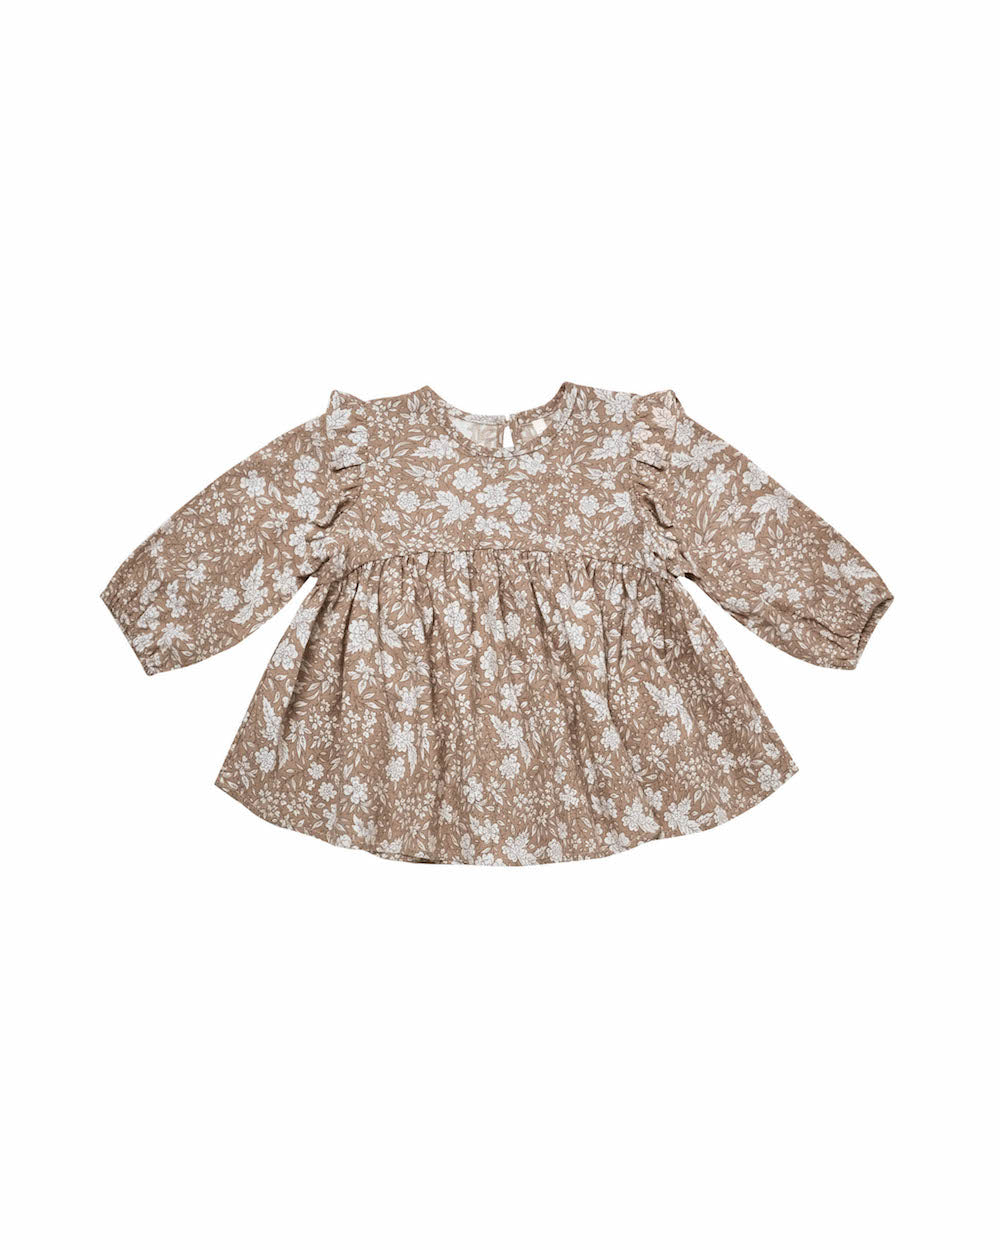 Rylee + Cru Piper Blouse - Soft Floral – Dreams of Cuteness